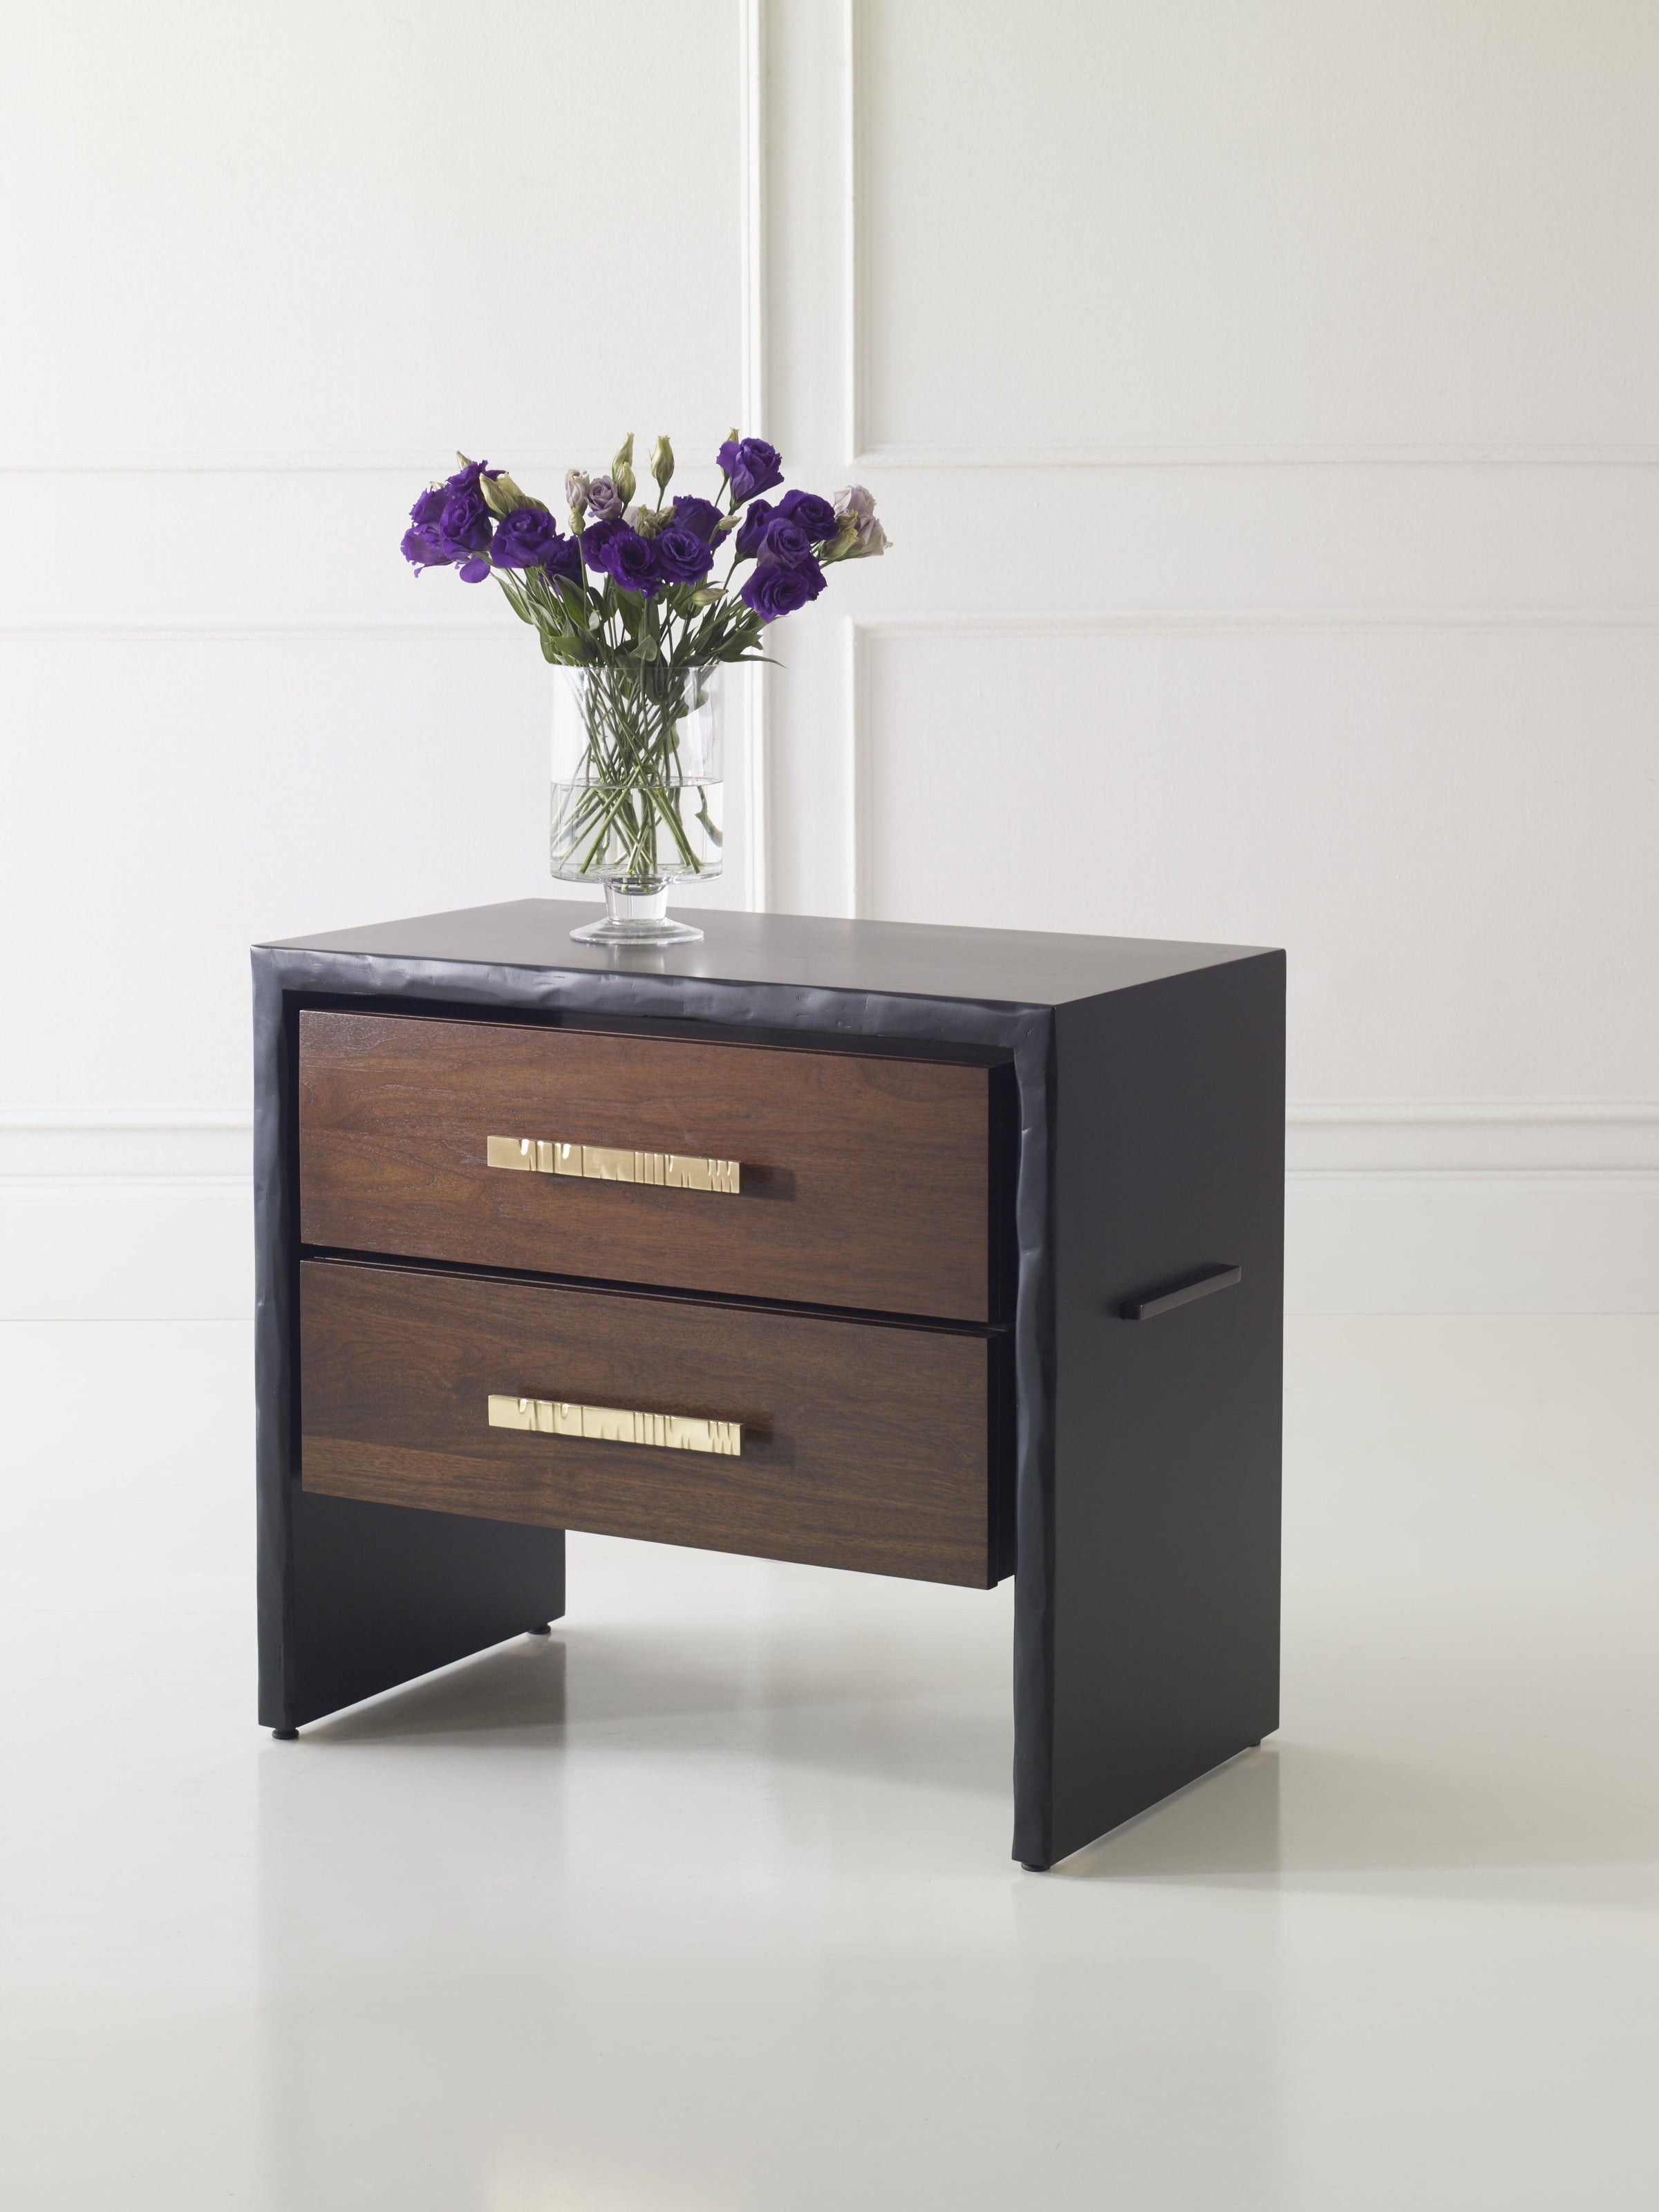 Nightstands - ST2 bench made in America